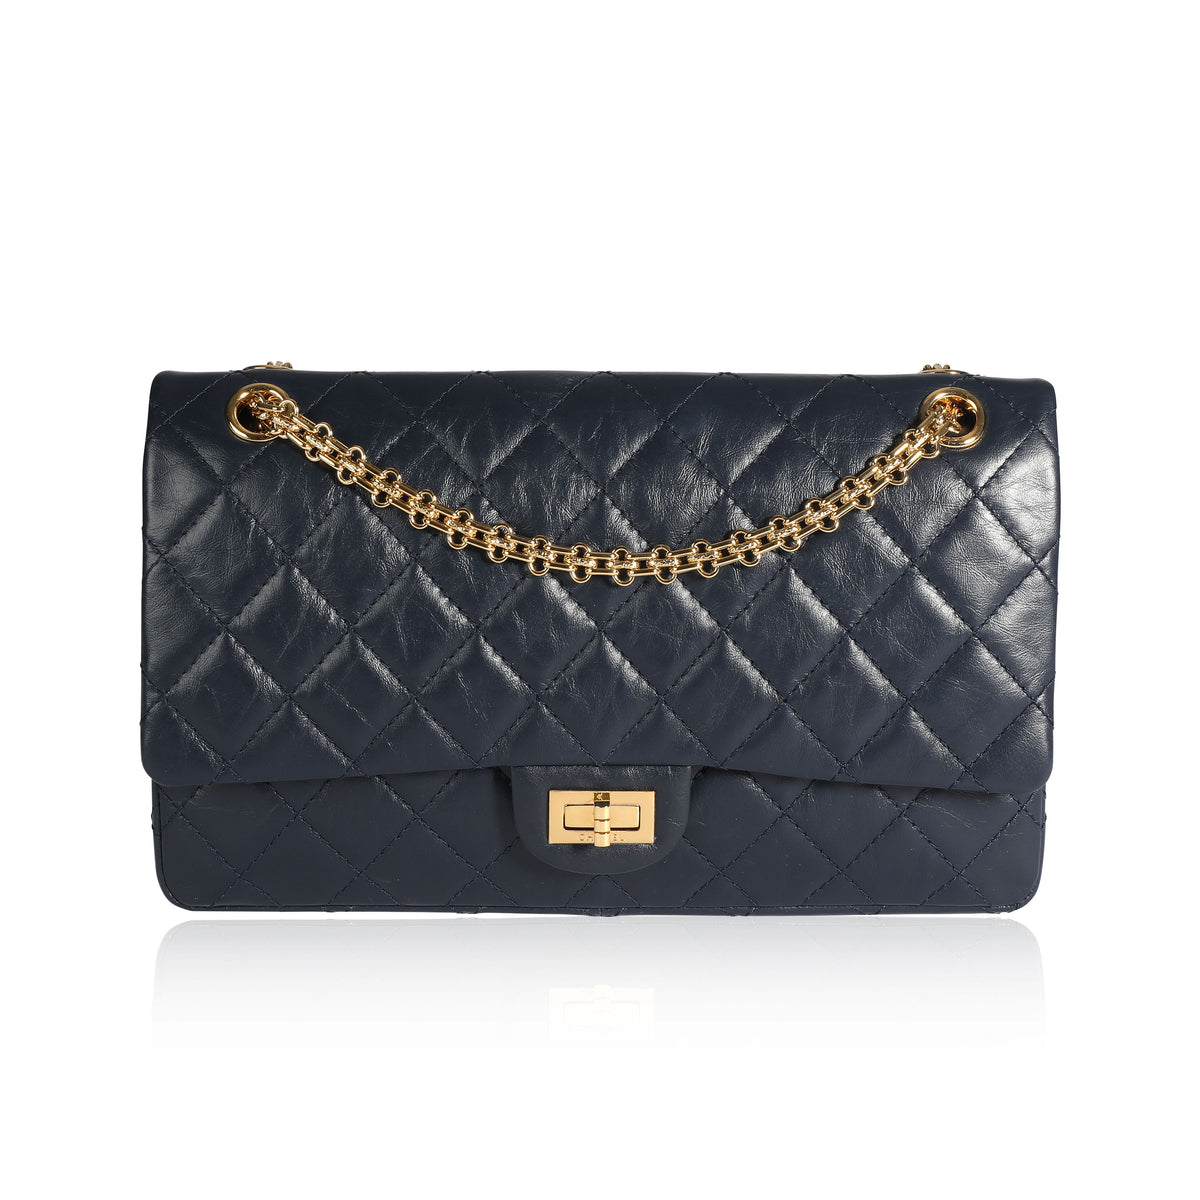 Chanel Marine Quilted Aged Calfskin 2.55 Reissue 226 Flap Bag